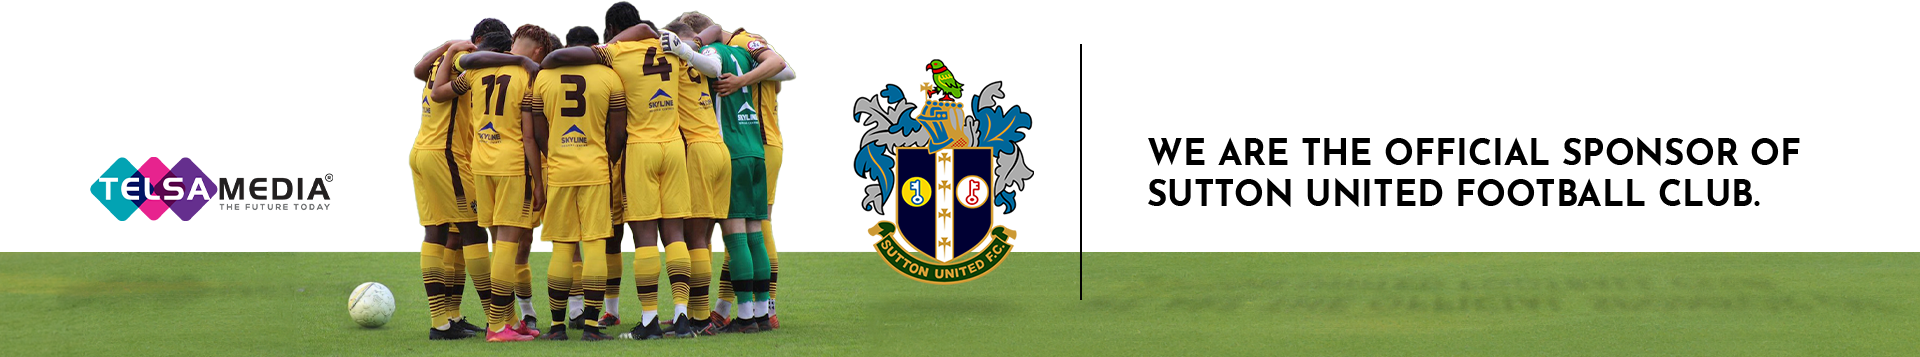 Official Sponsors of Sutton United